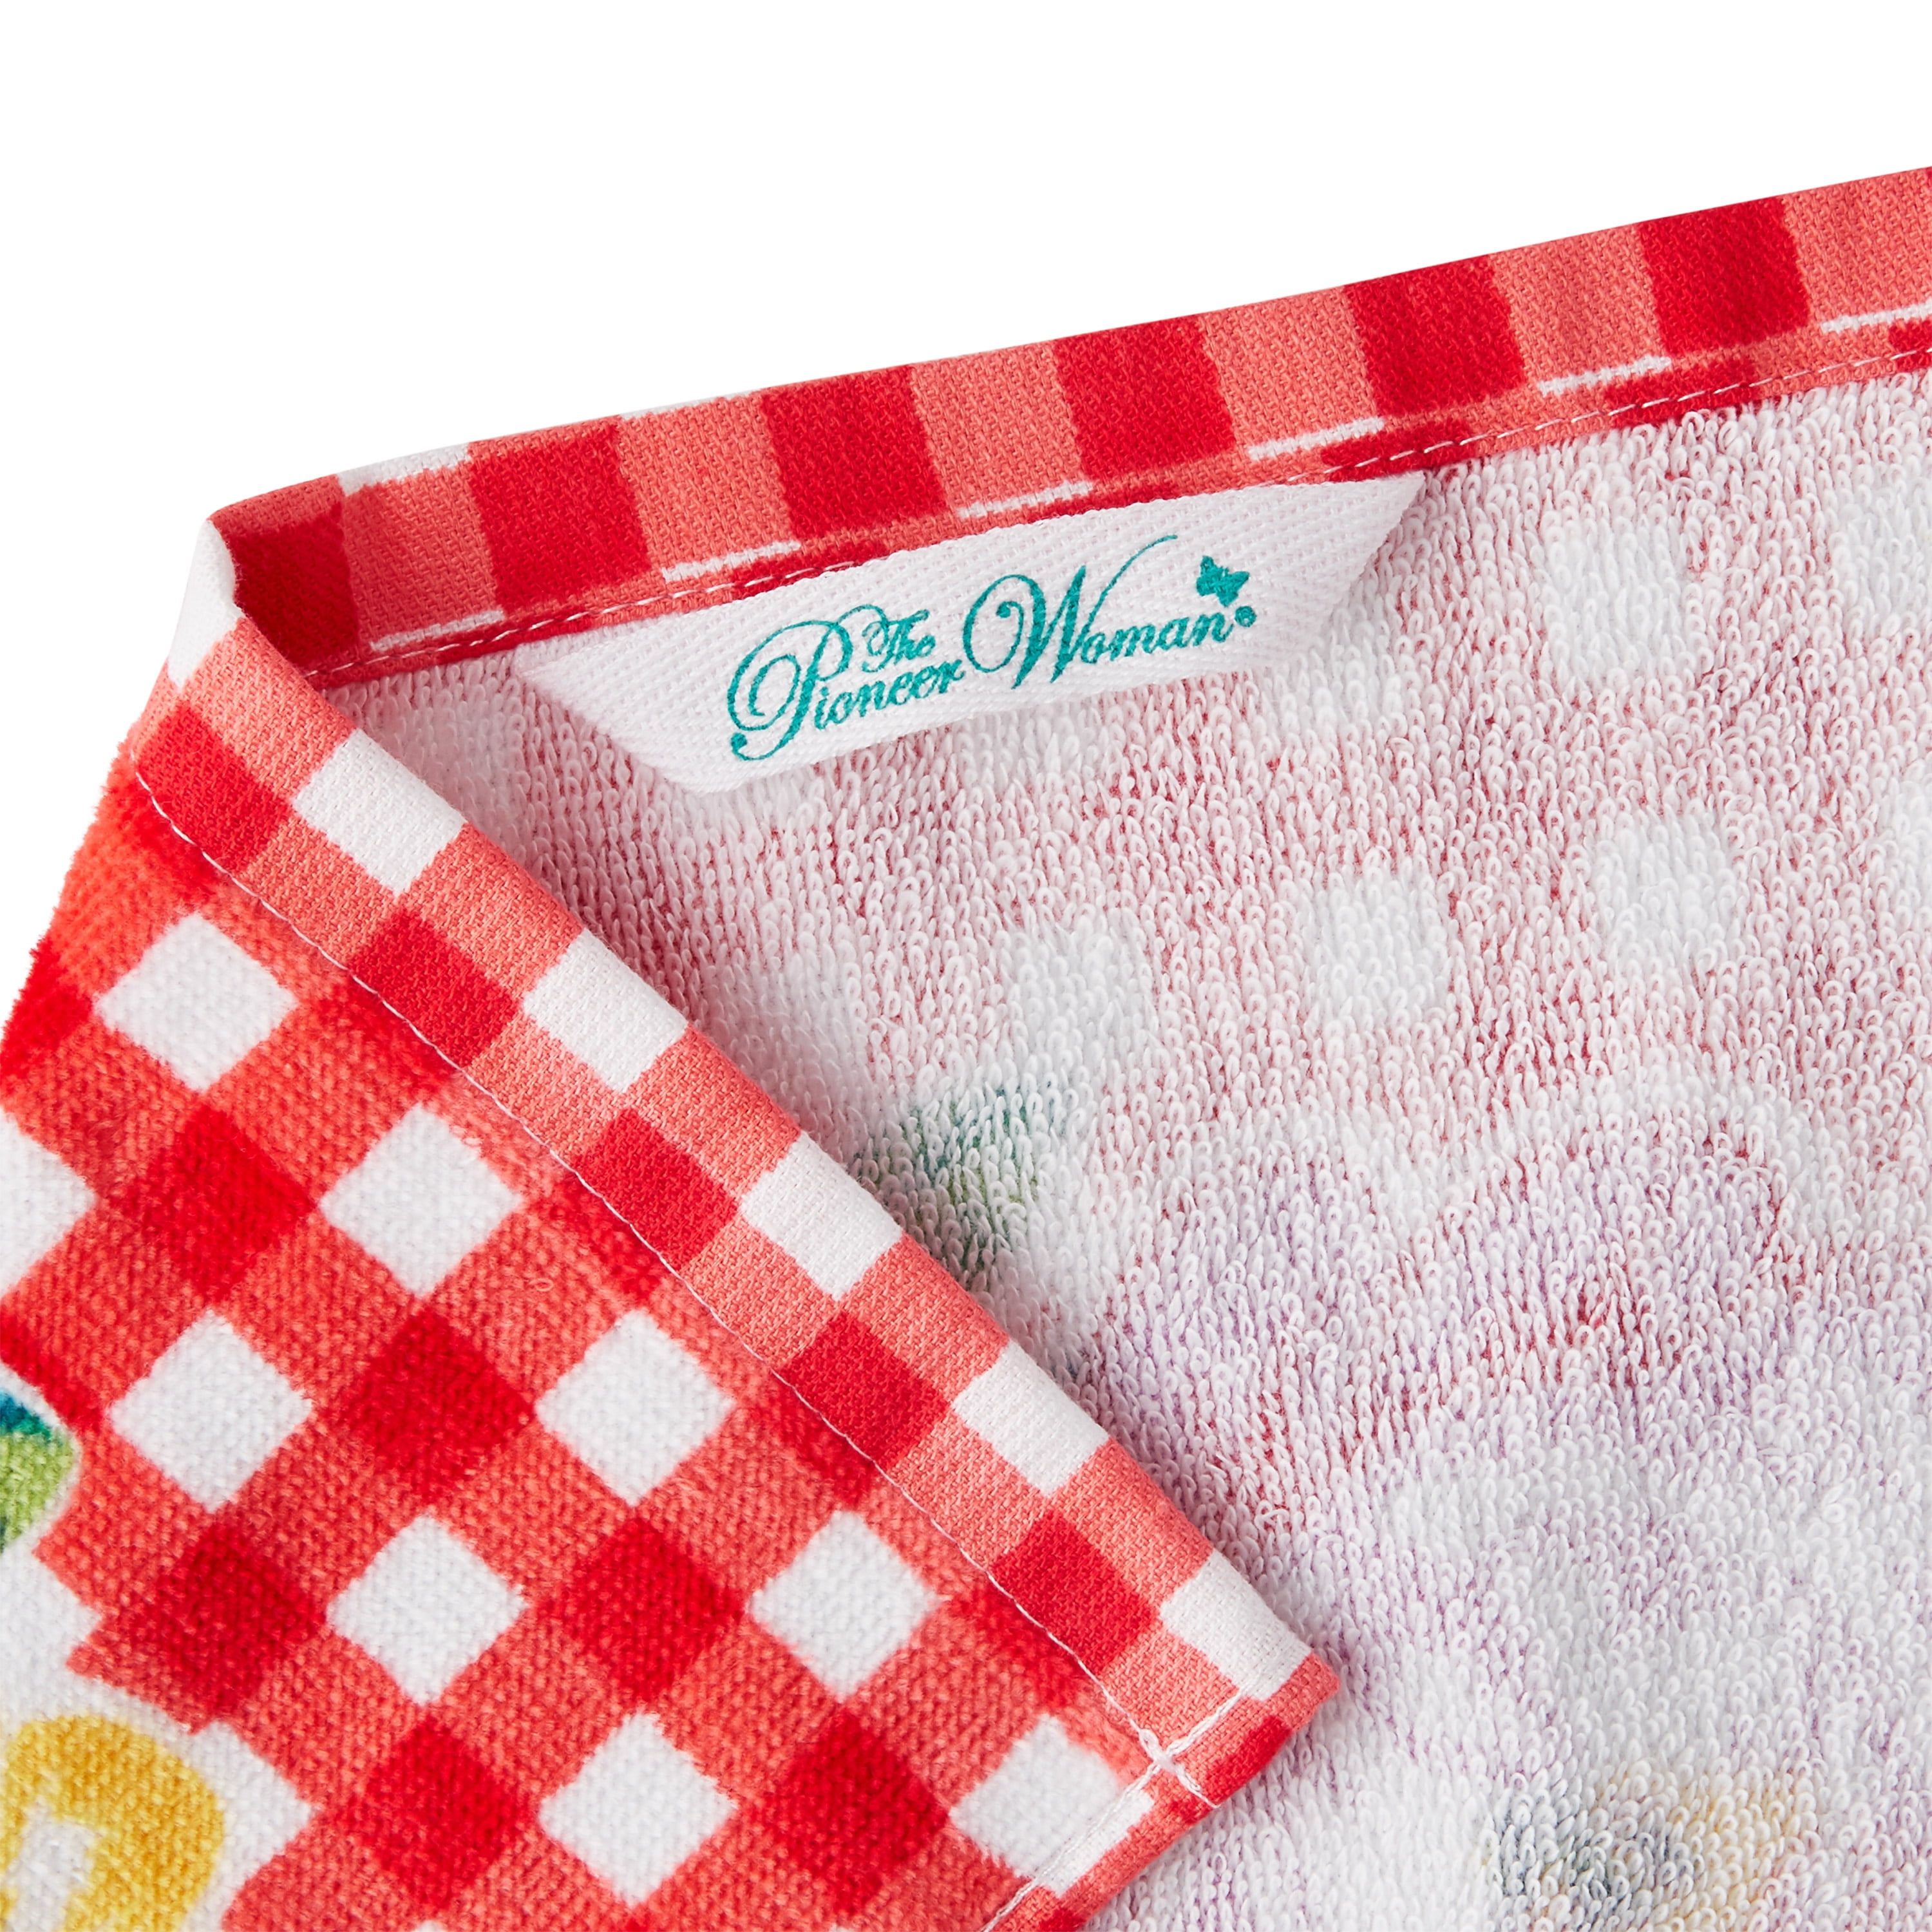 The Pioneer Woman Dish Towels - Coordinates with her Dinnerware